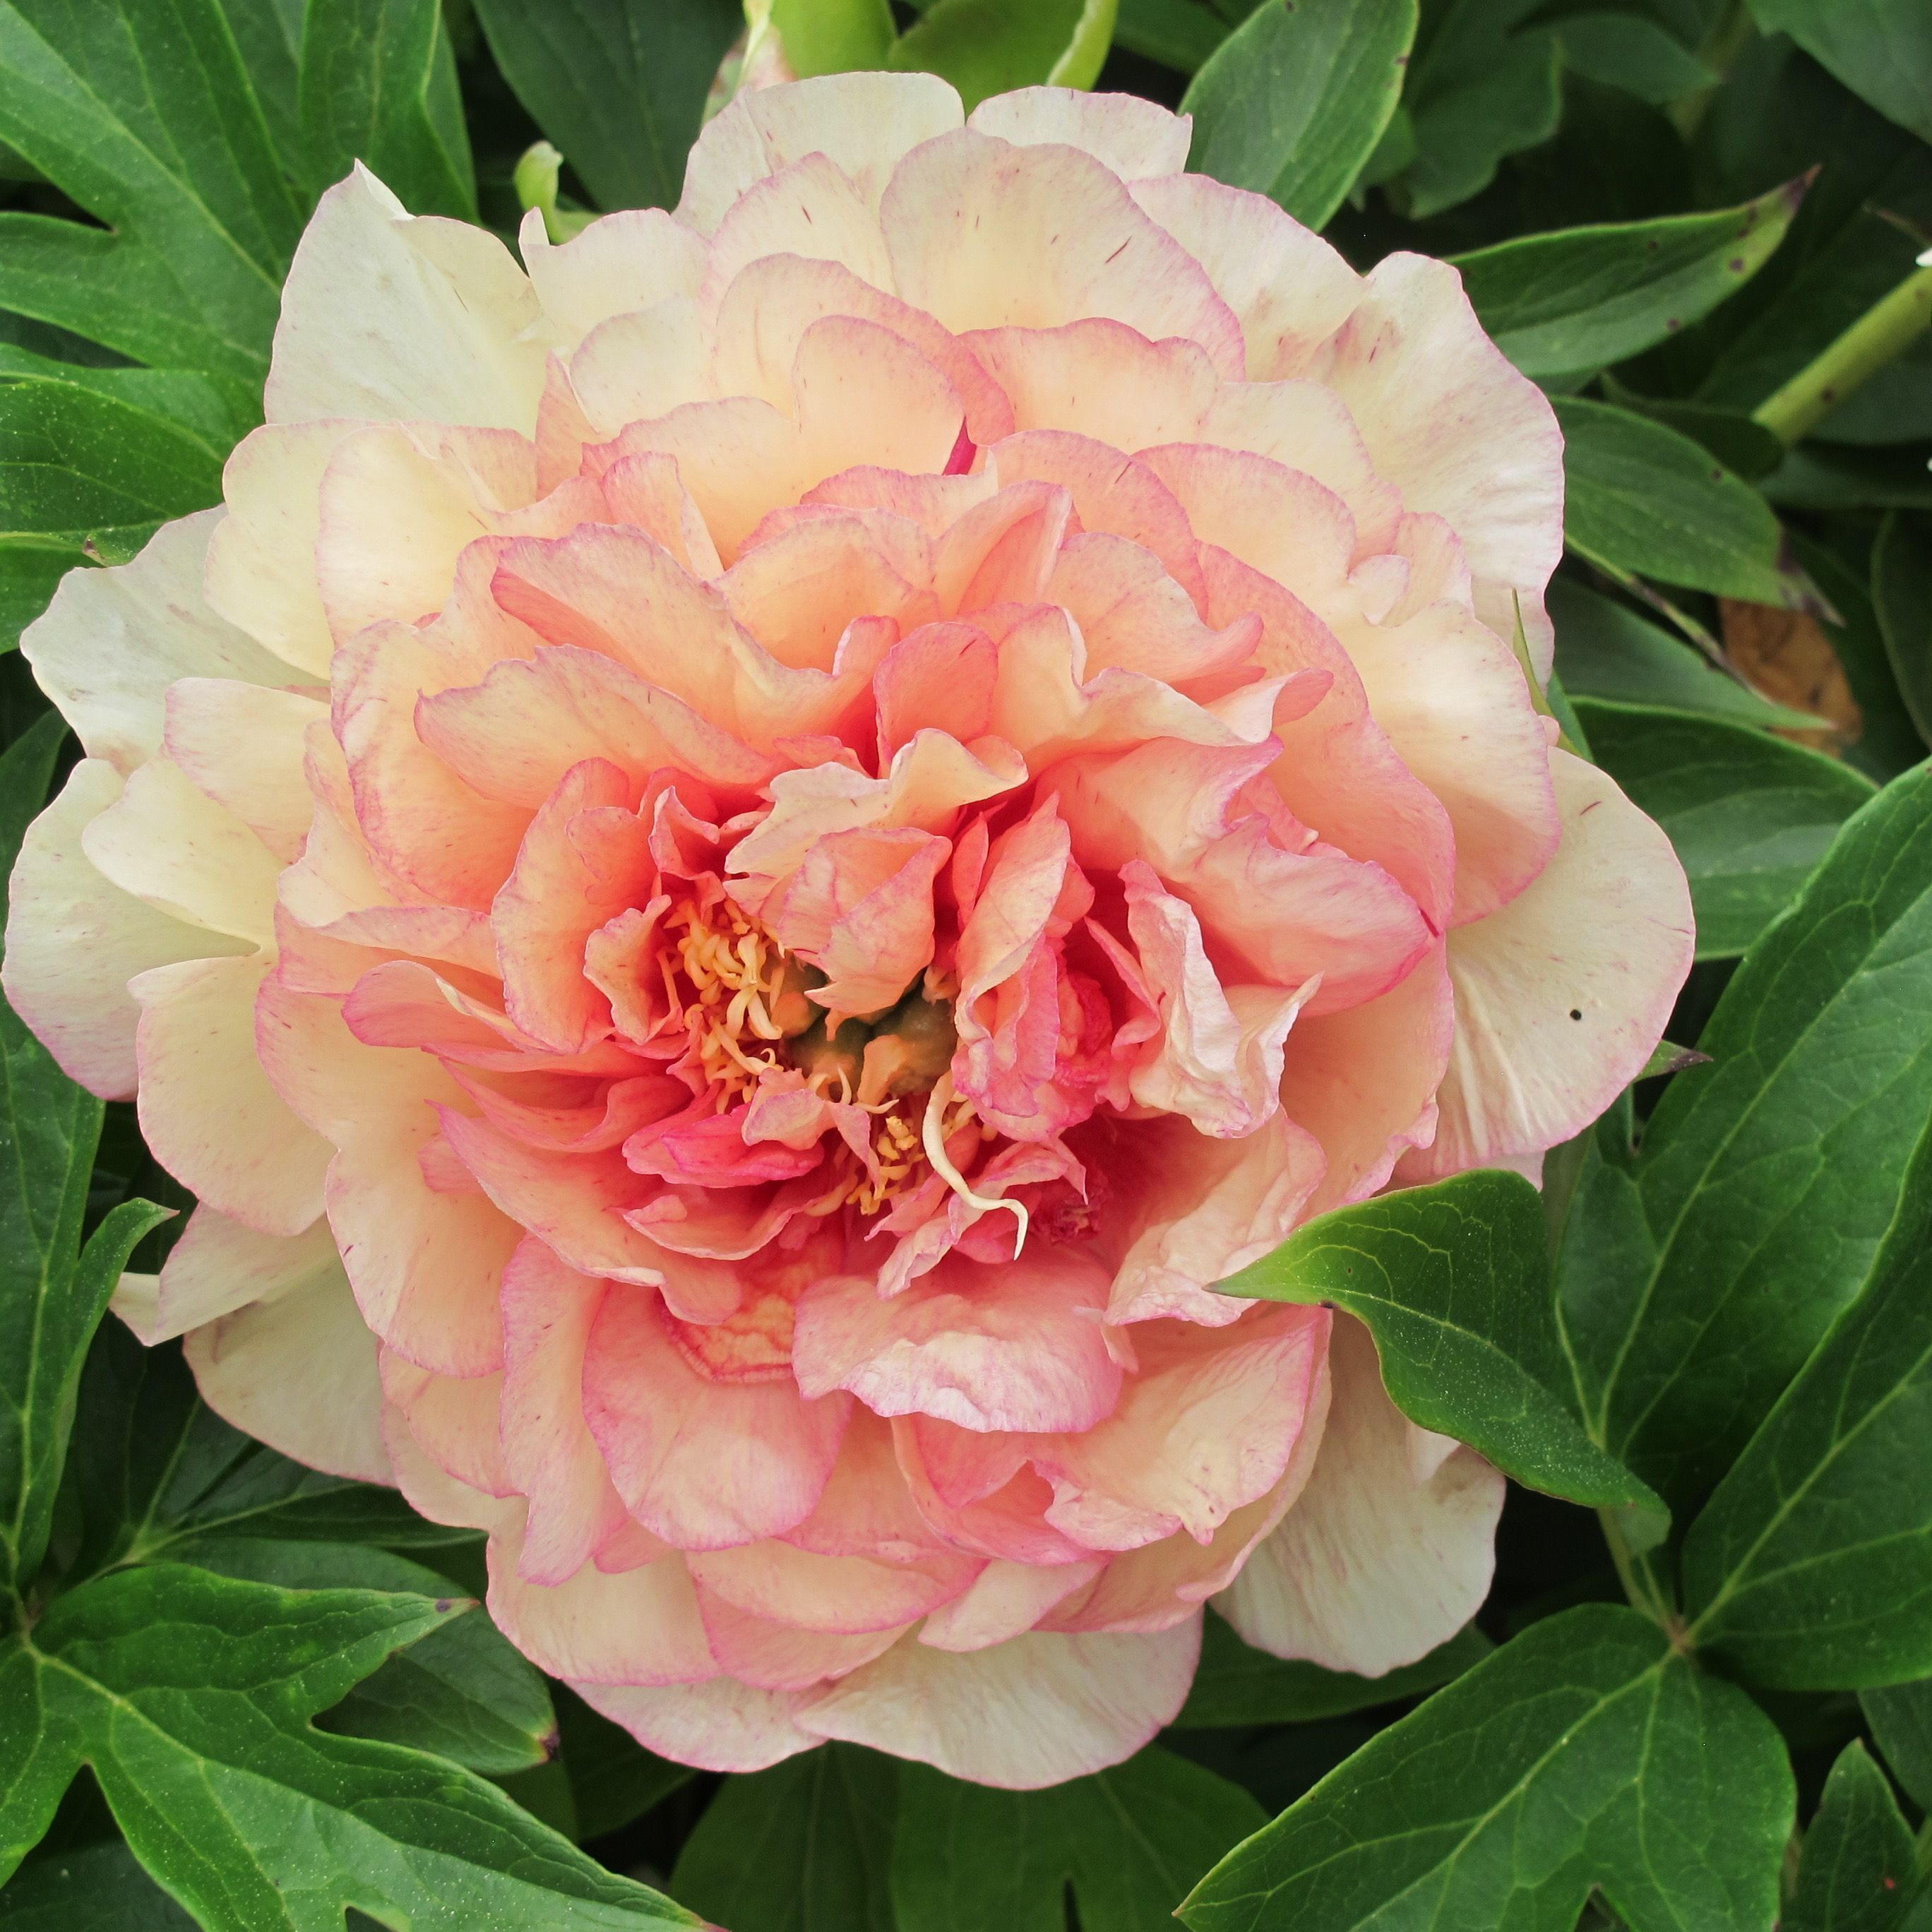 images/plants/paeonia/pae-truly-scrumptious/pae-truly-scrumptious-0014.JPG